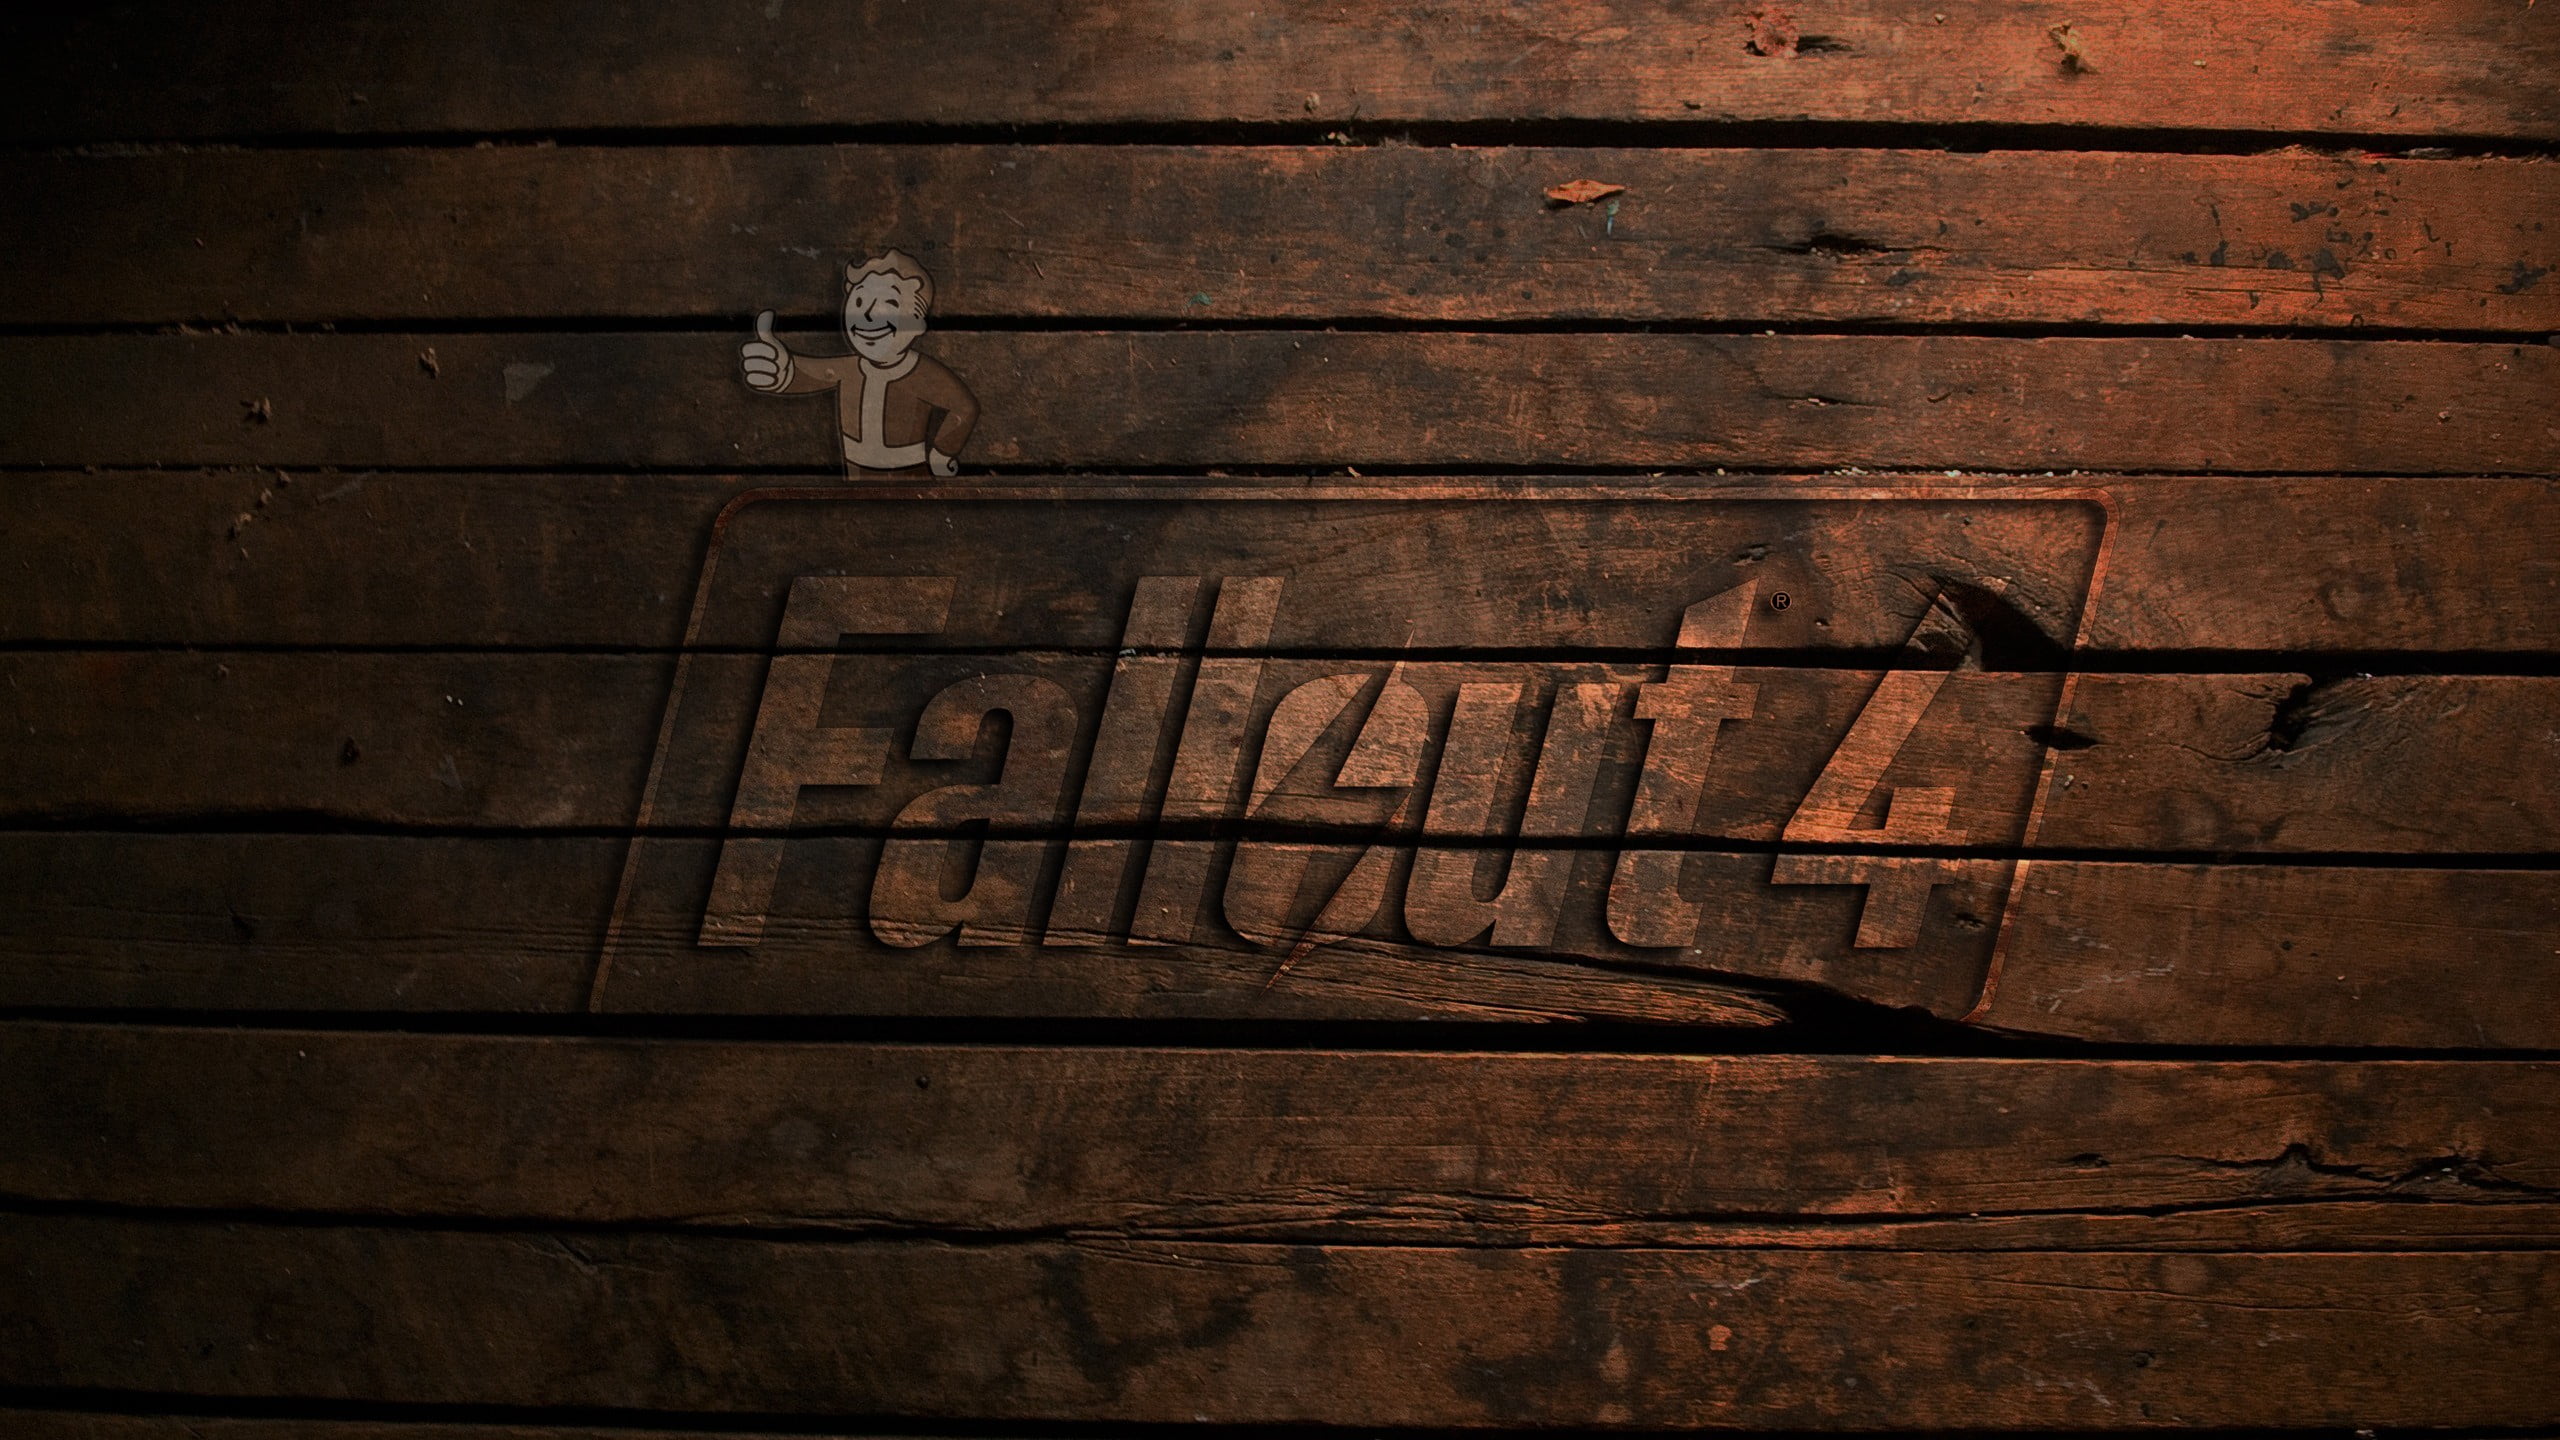 Fallout 4 digital wallpaper, wood - material, text, indoors, no people